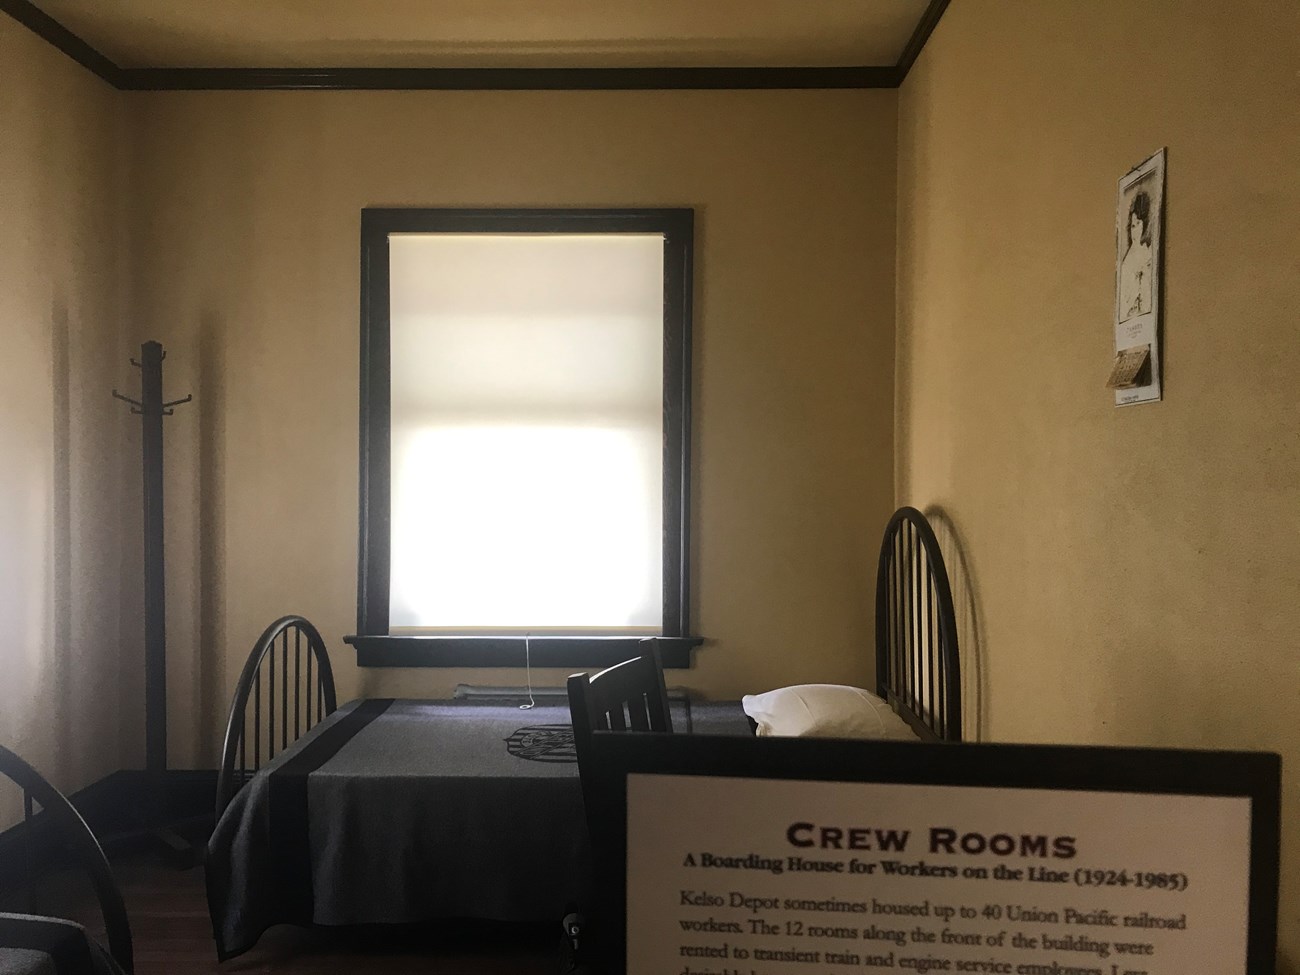 Crew bedrooms with window Kelso Depot.  A bed with a metal frame, blue Union Pacific sheets, and a white pillow.  An early 20th century calendar on the right wall. A coat stand in the left corner.  The edge of a second bed seen on the left.